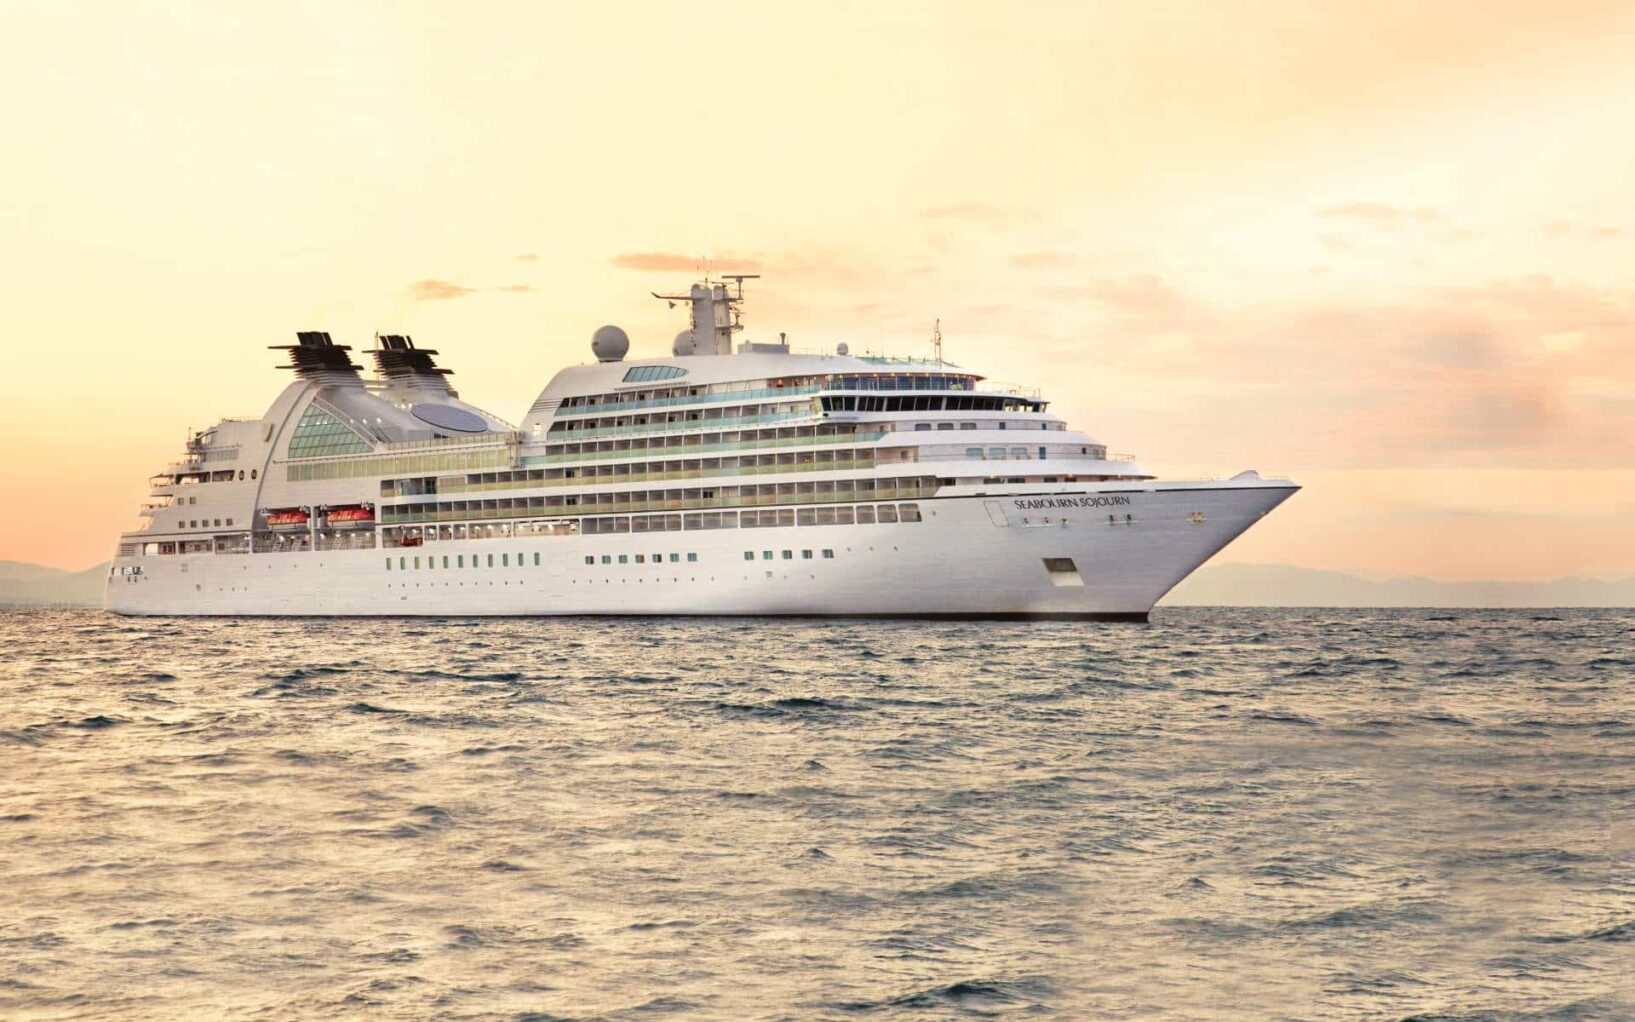 The Seabourn Sojurn cruise ship on the water at sunset